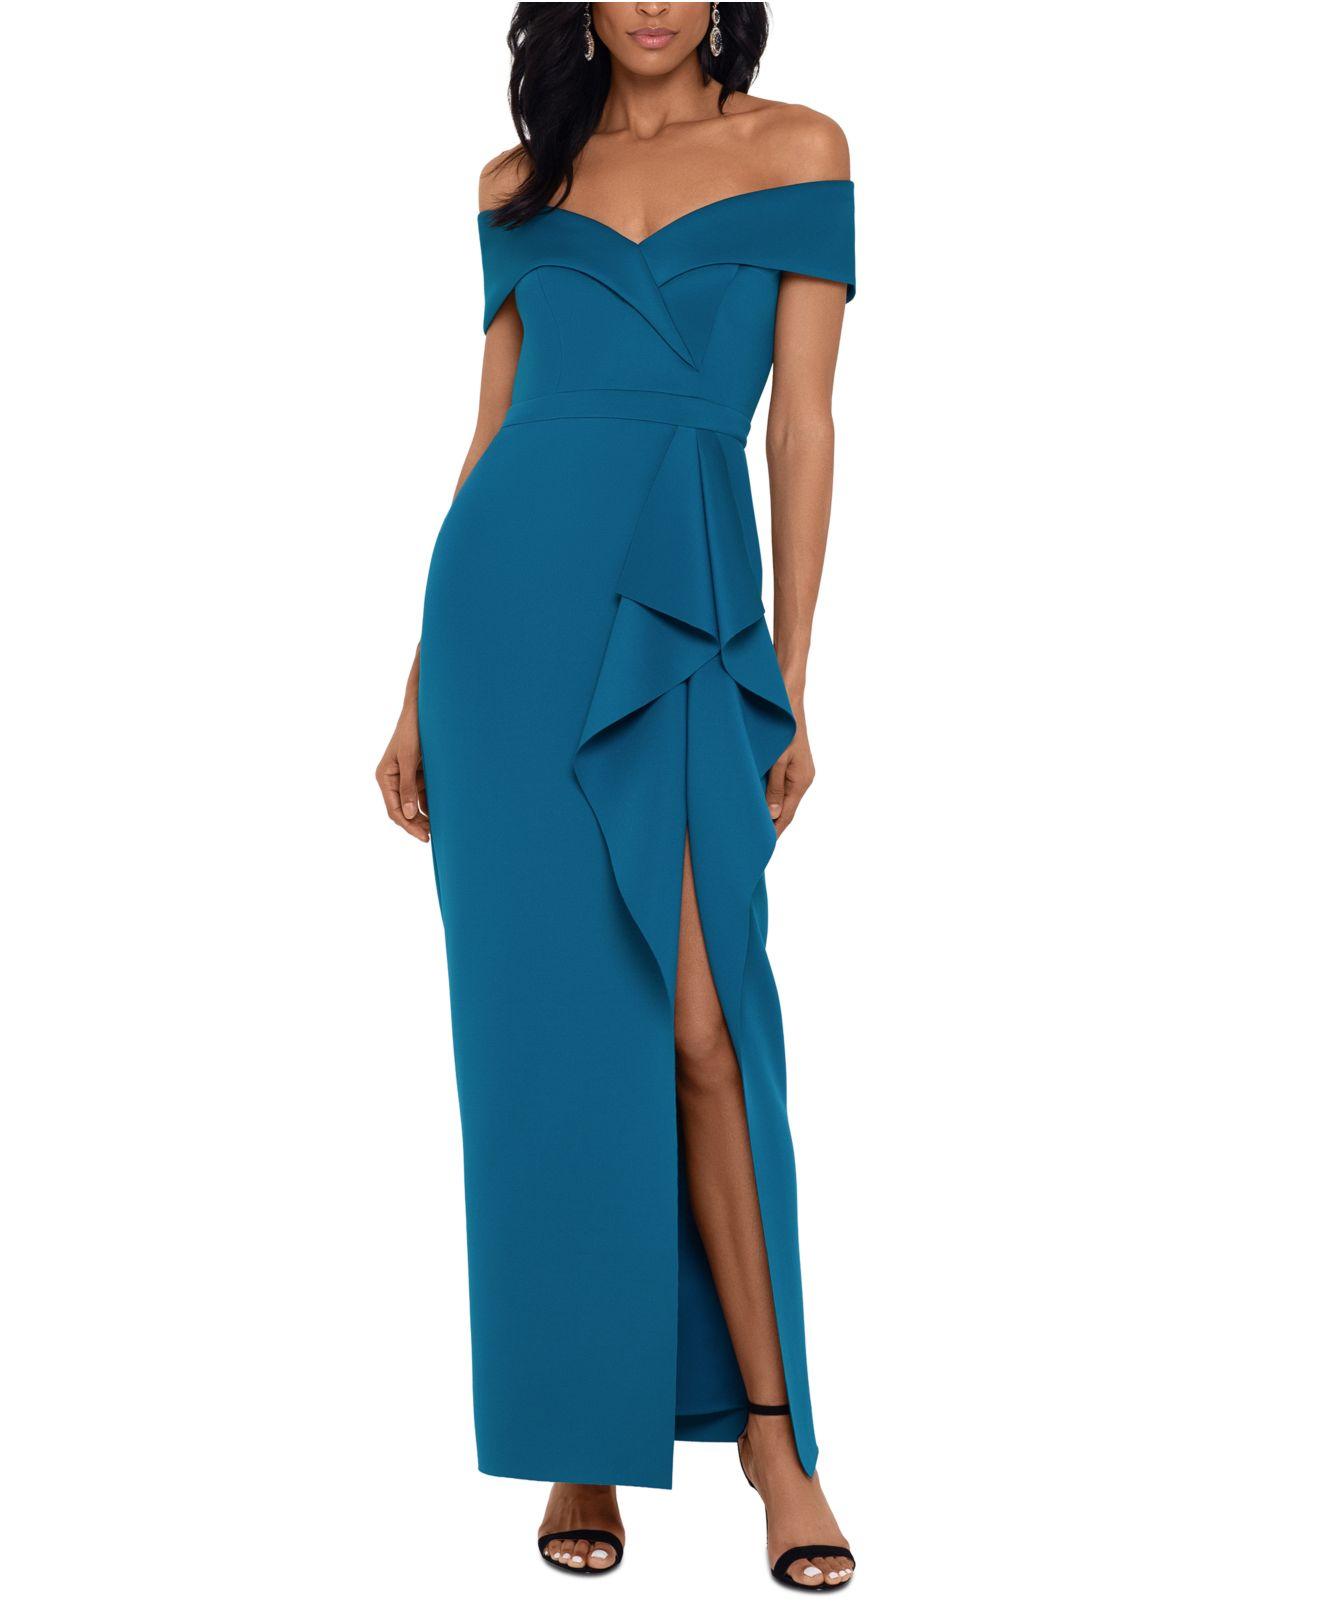 Xscape Synthetic Off-the Shoulder Ruffled Gown in Teal Blue (Blue) - Lyst